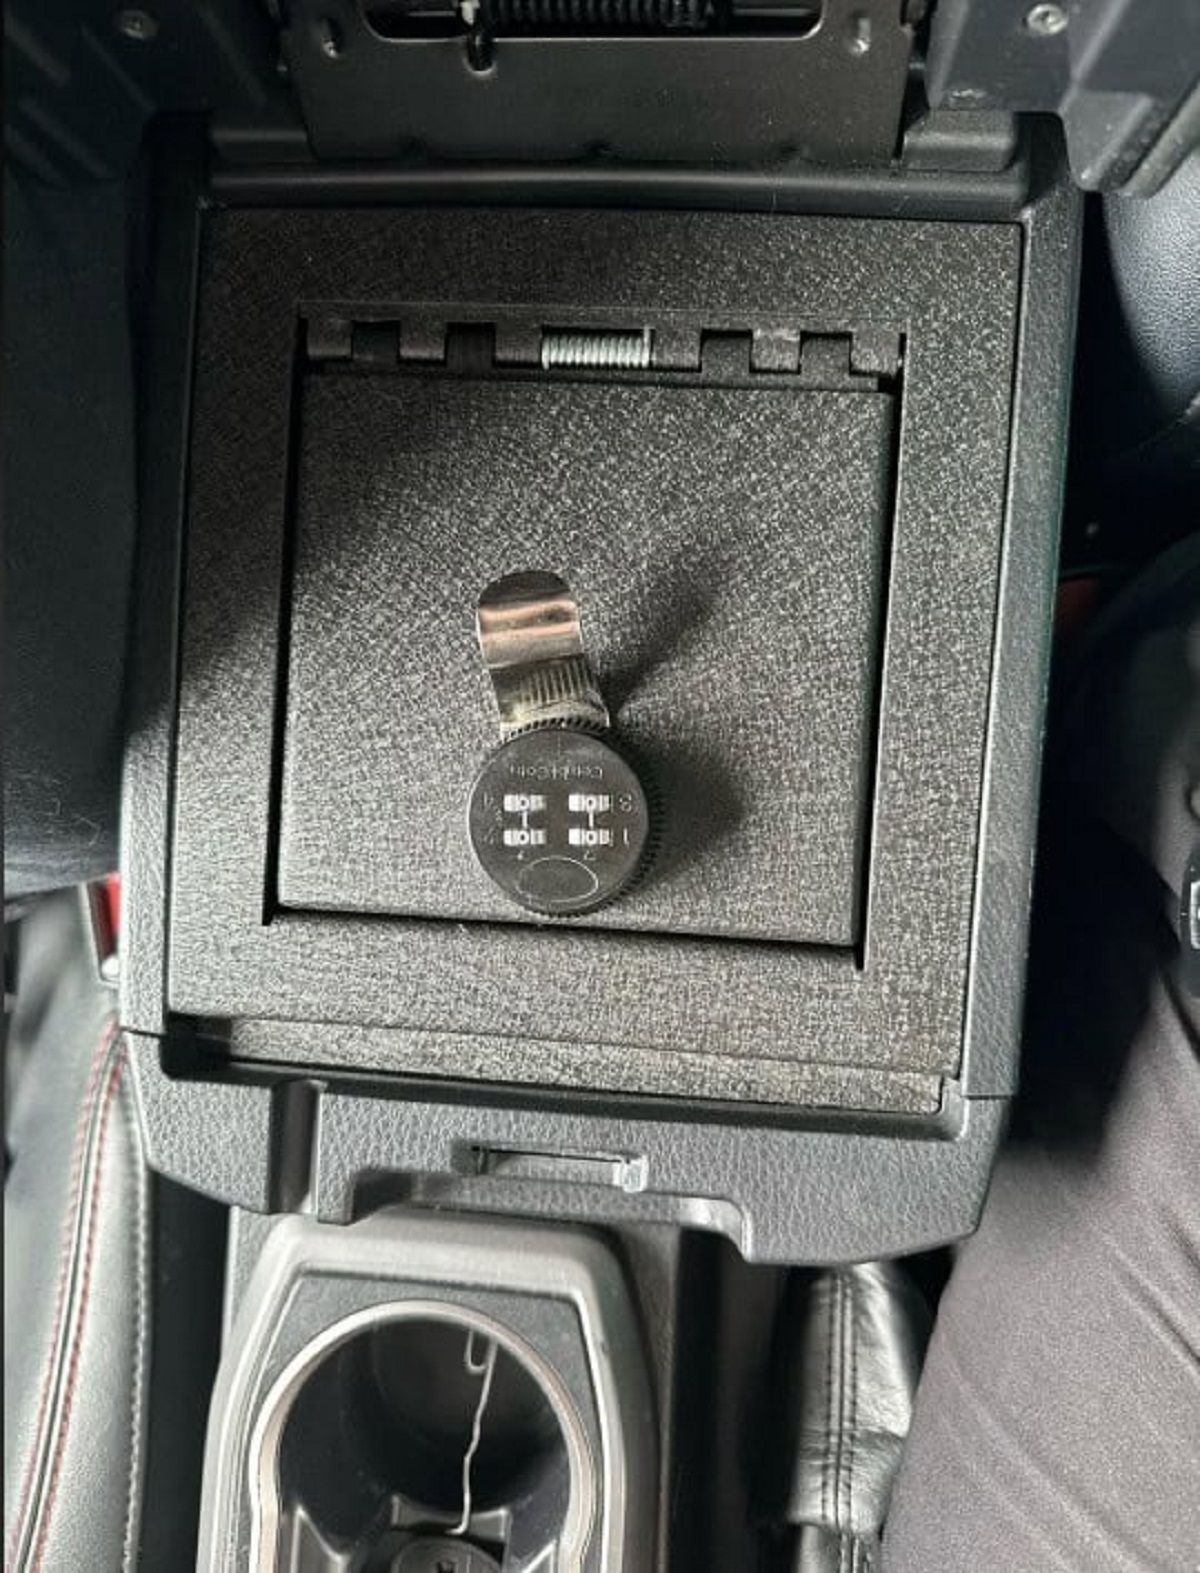 Dealership sold me a car with a locked console safe.